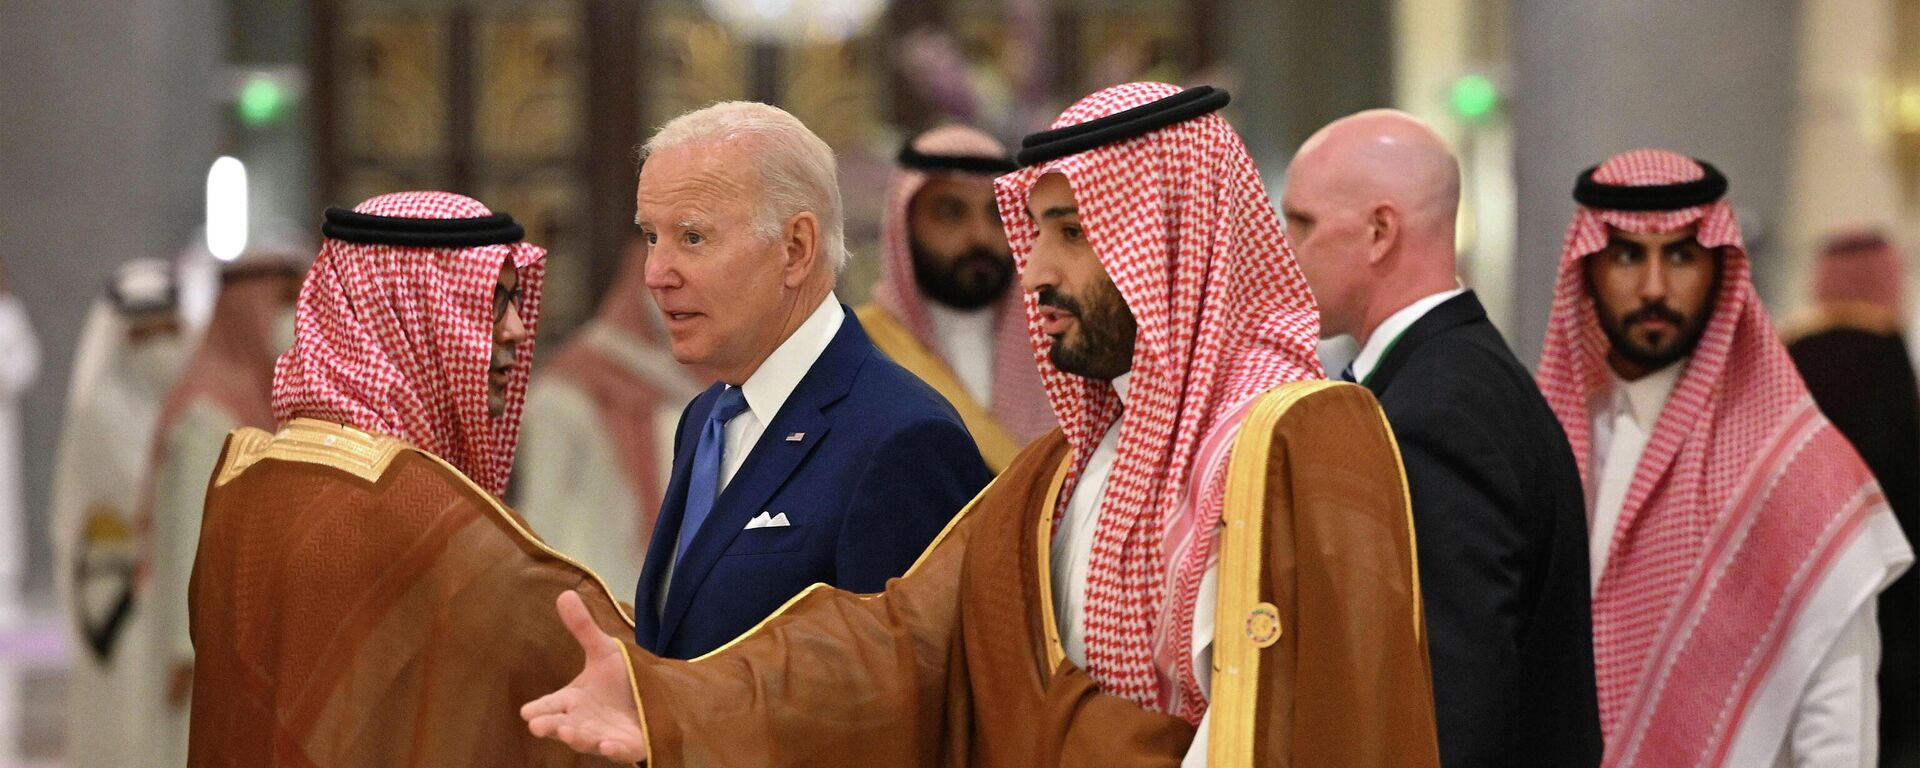 U.S. President Joe Biden, center left, and Saudi Crown Prince Mohammed bin Salman, center, arrive for the family photo during the GCC+3 (Gulf Cooperation Council) meeting at a hotel in Saudi Arabia's Red Sea coastal city of Jeddah Saturday, July 16, 2022 - Sputnik International, 1920, 22.12.2023